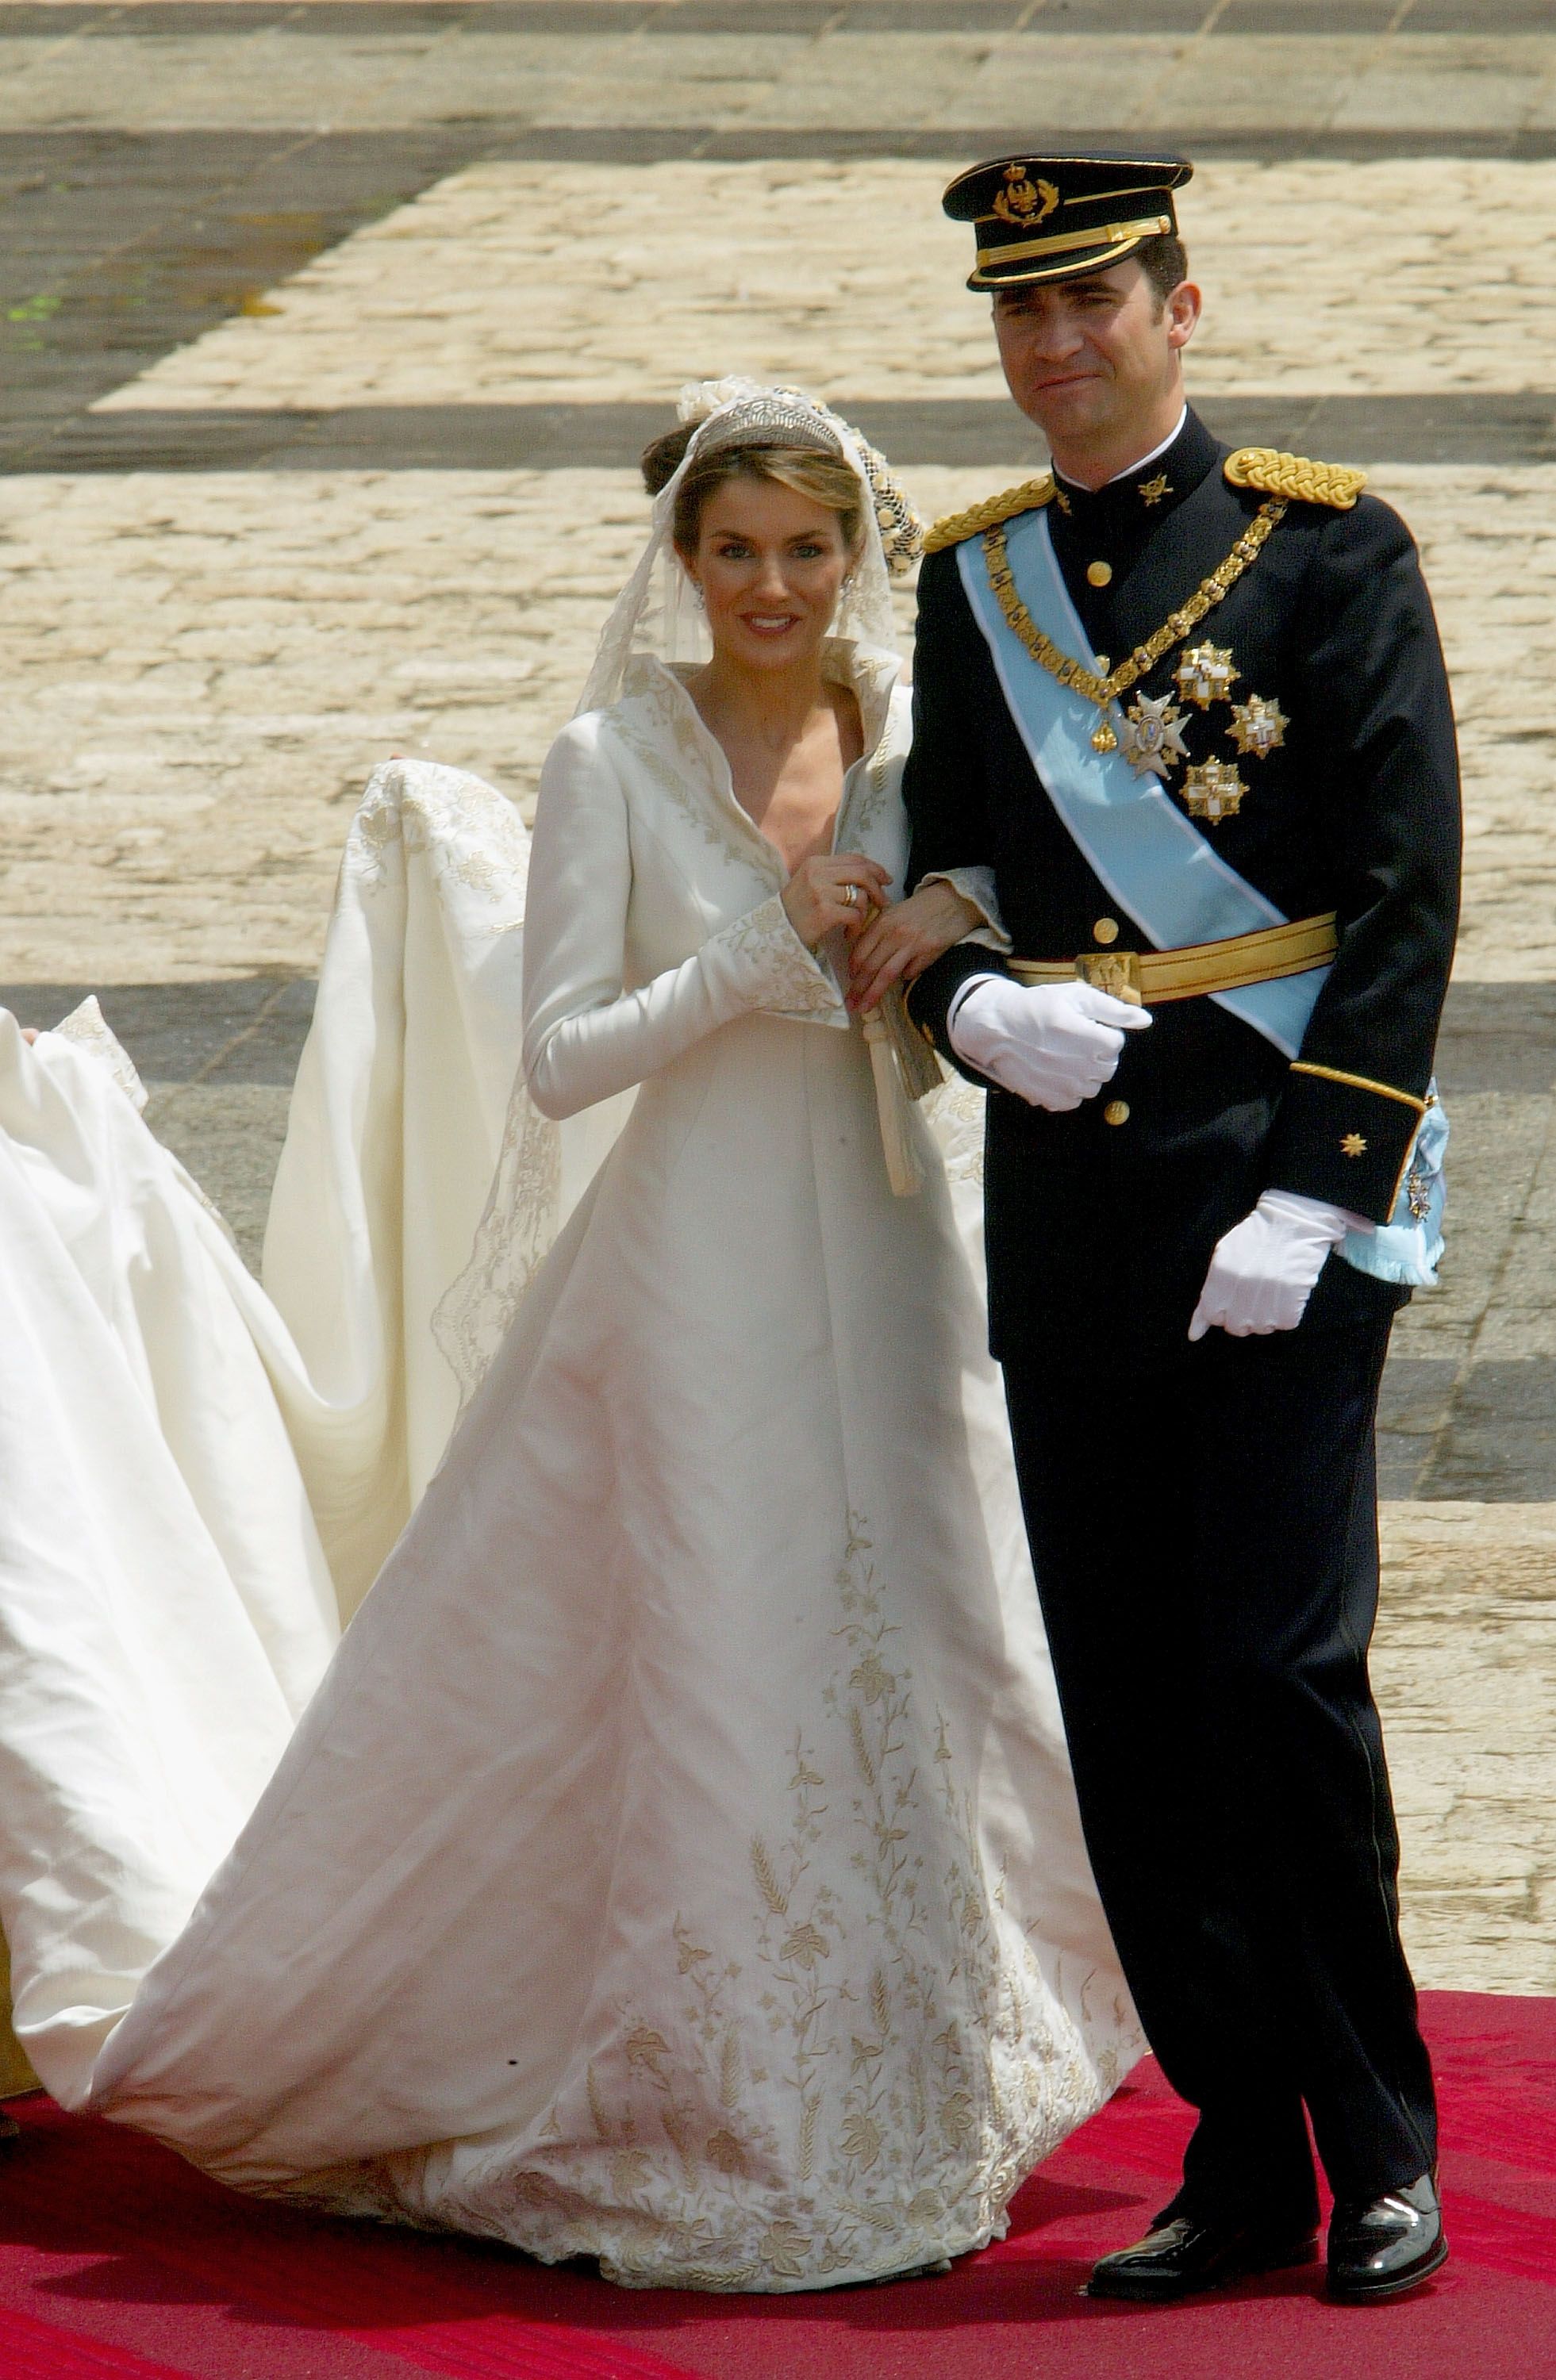 Before Meghan Markle Prince Harry's Royal Wedding, A Look At Best Royal  Wedding Gowns